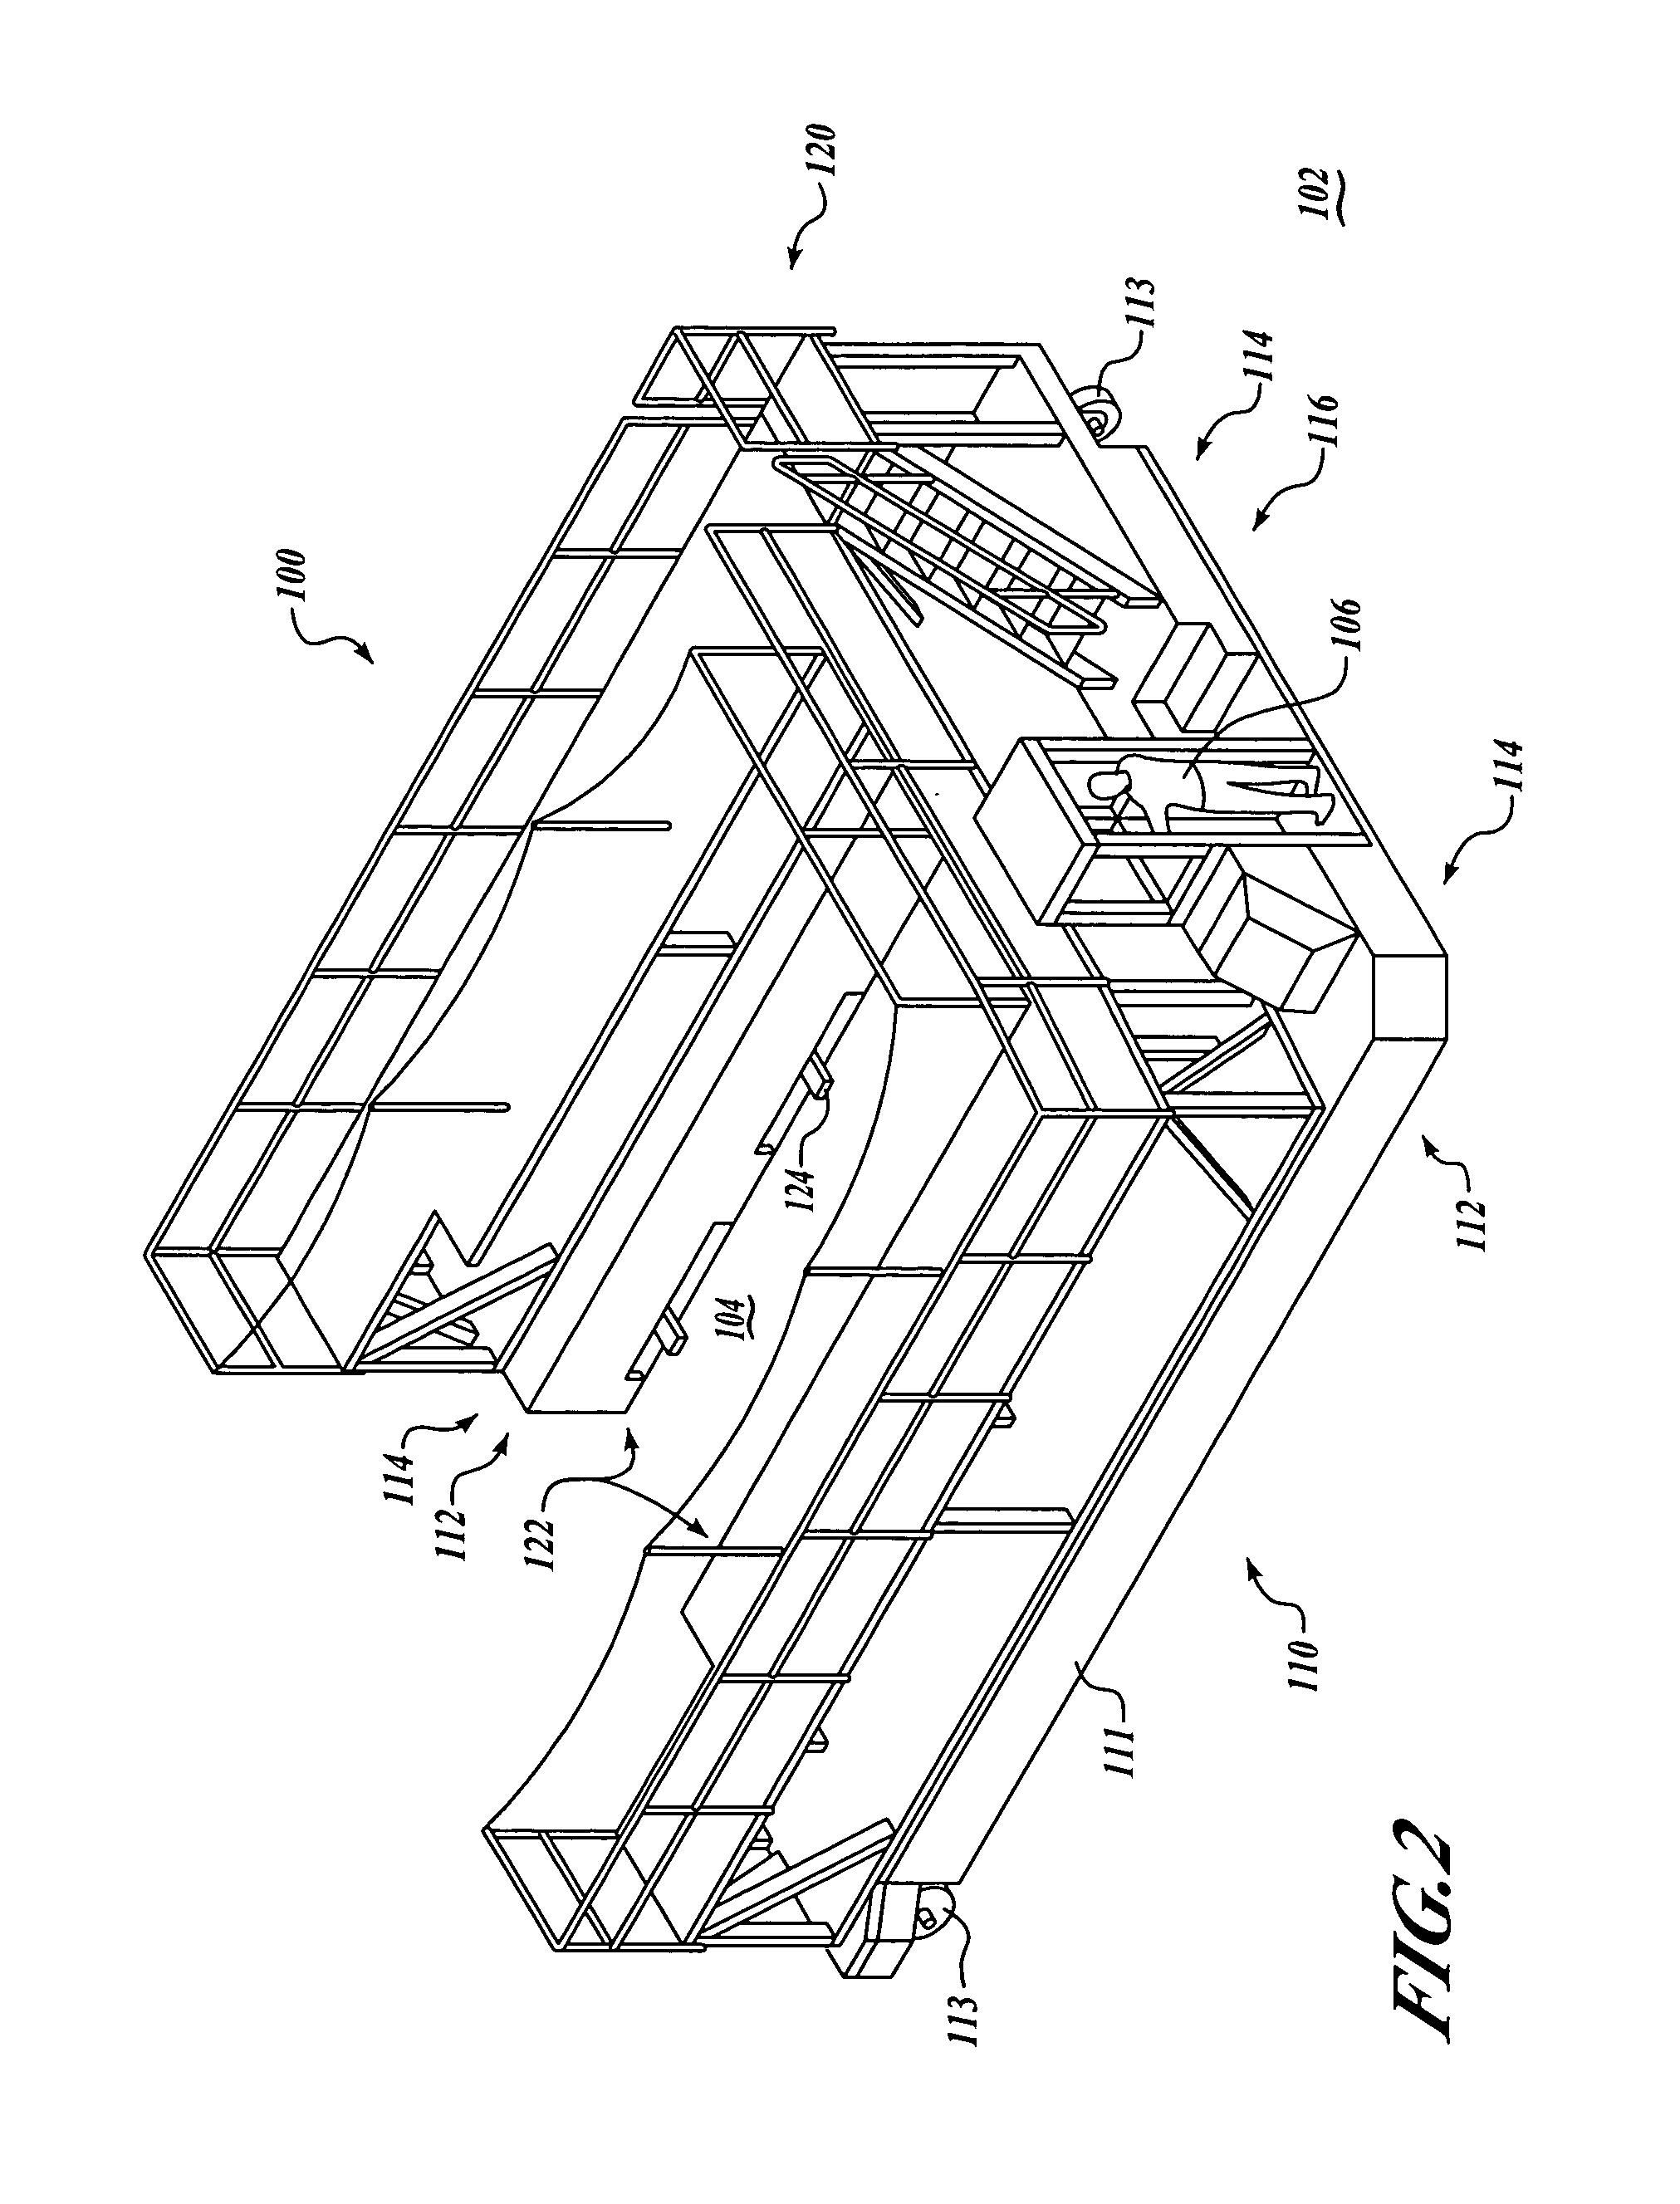 Engine loader and transporter apparatus and methods